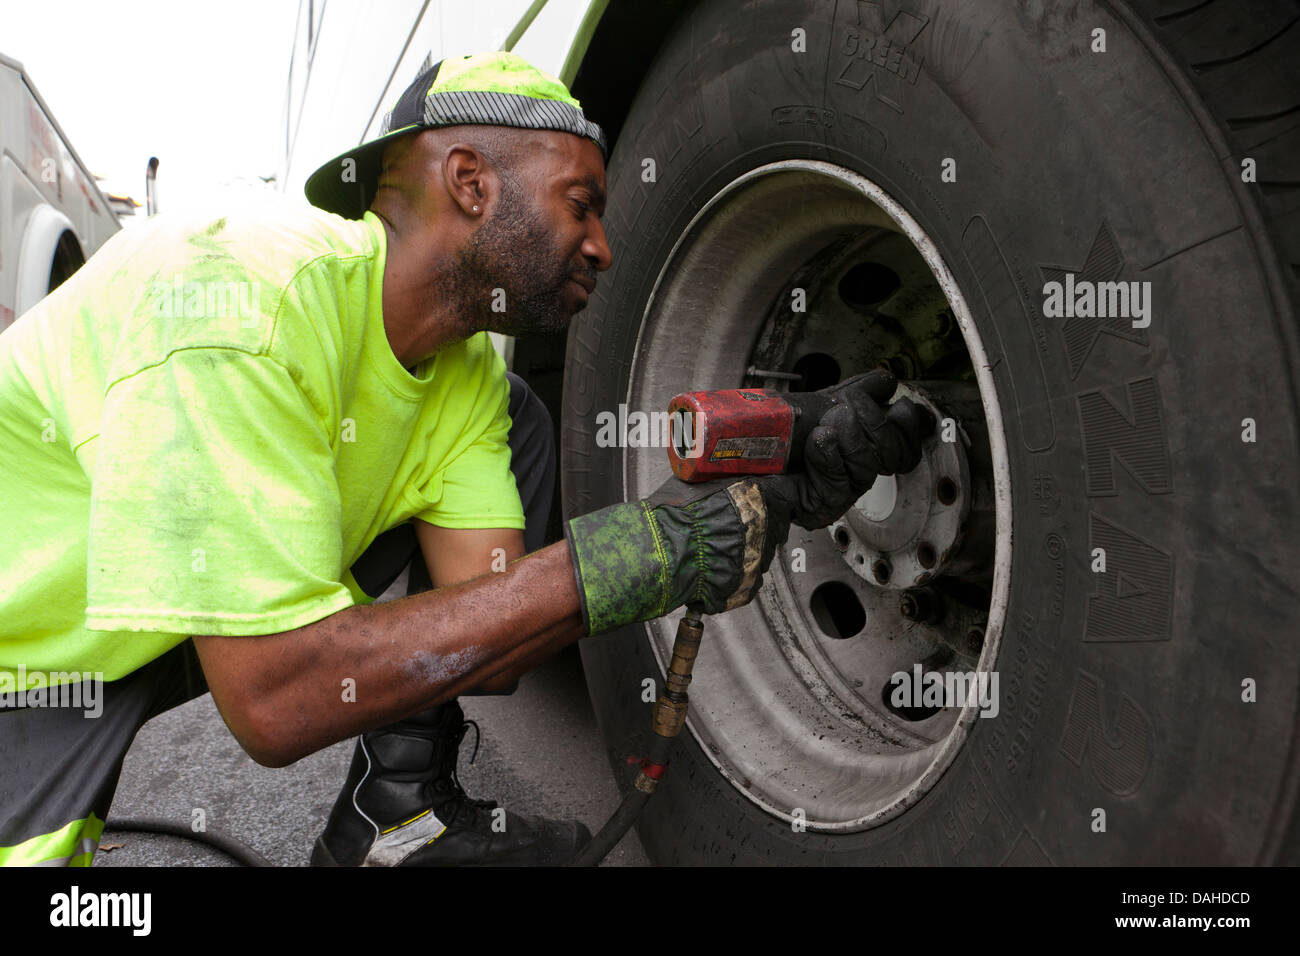 Mechanic removing a bus wheel with an impact wrench Stock Photo